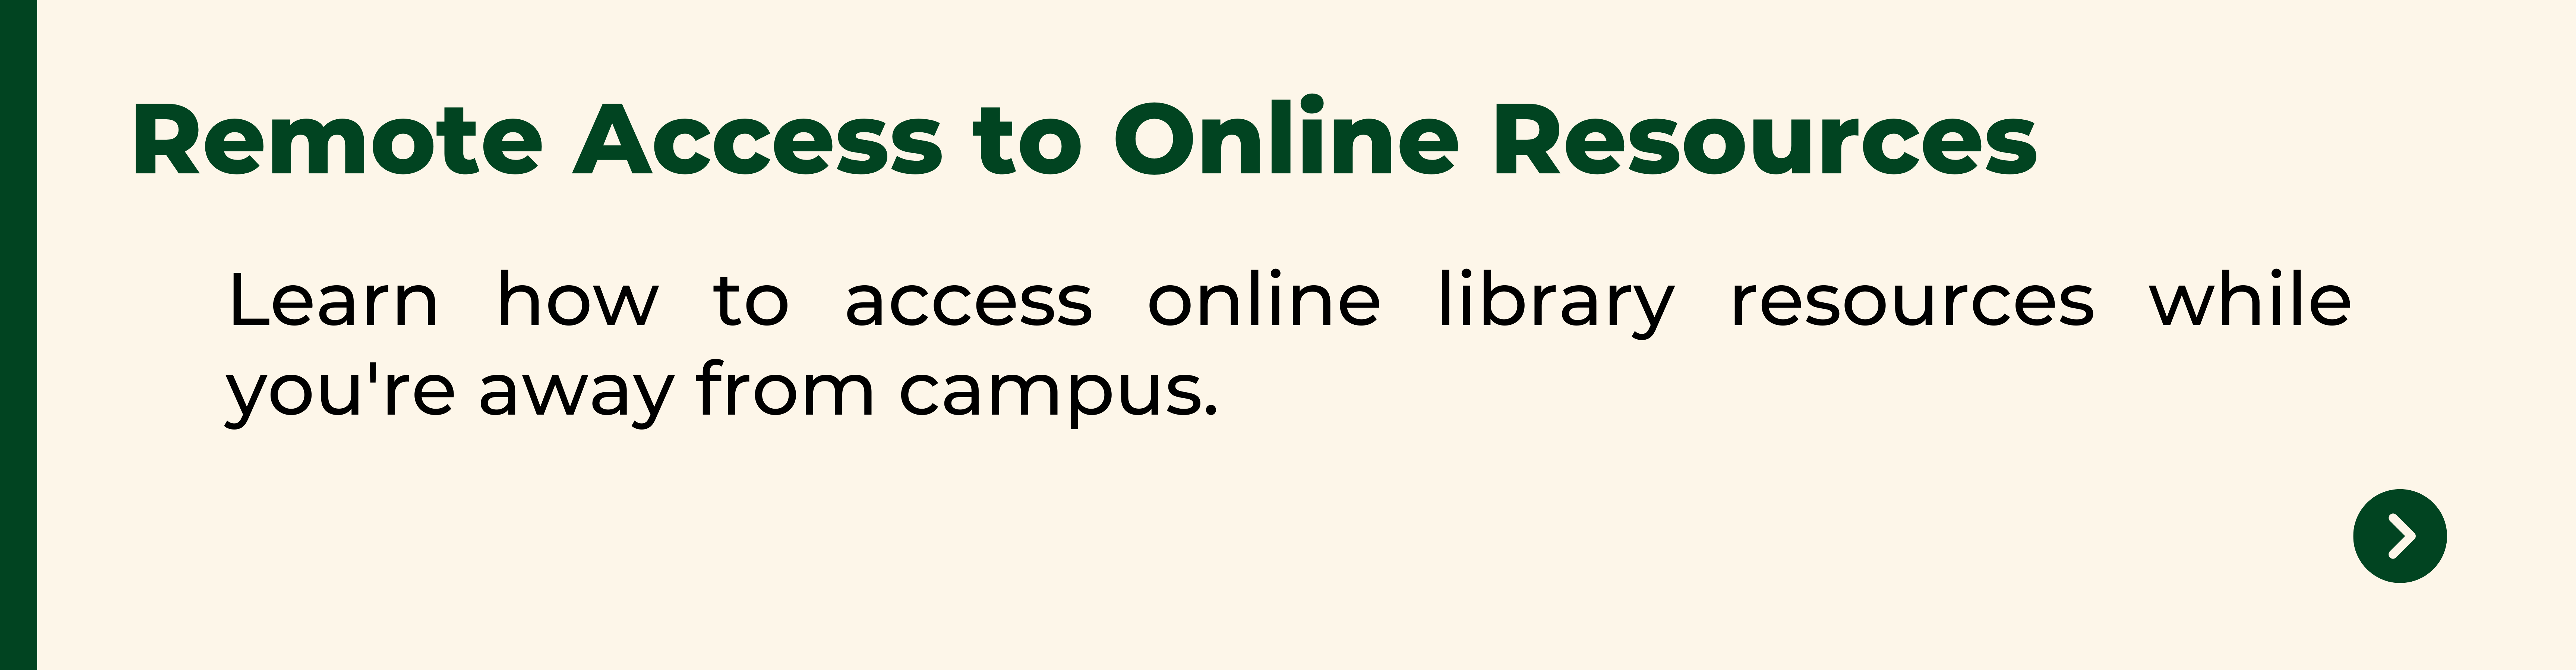 Remote Access to Online Resources